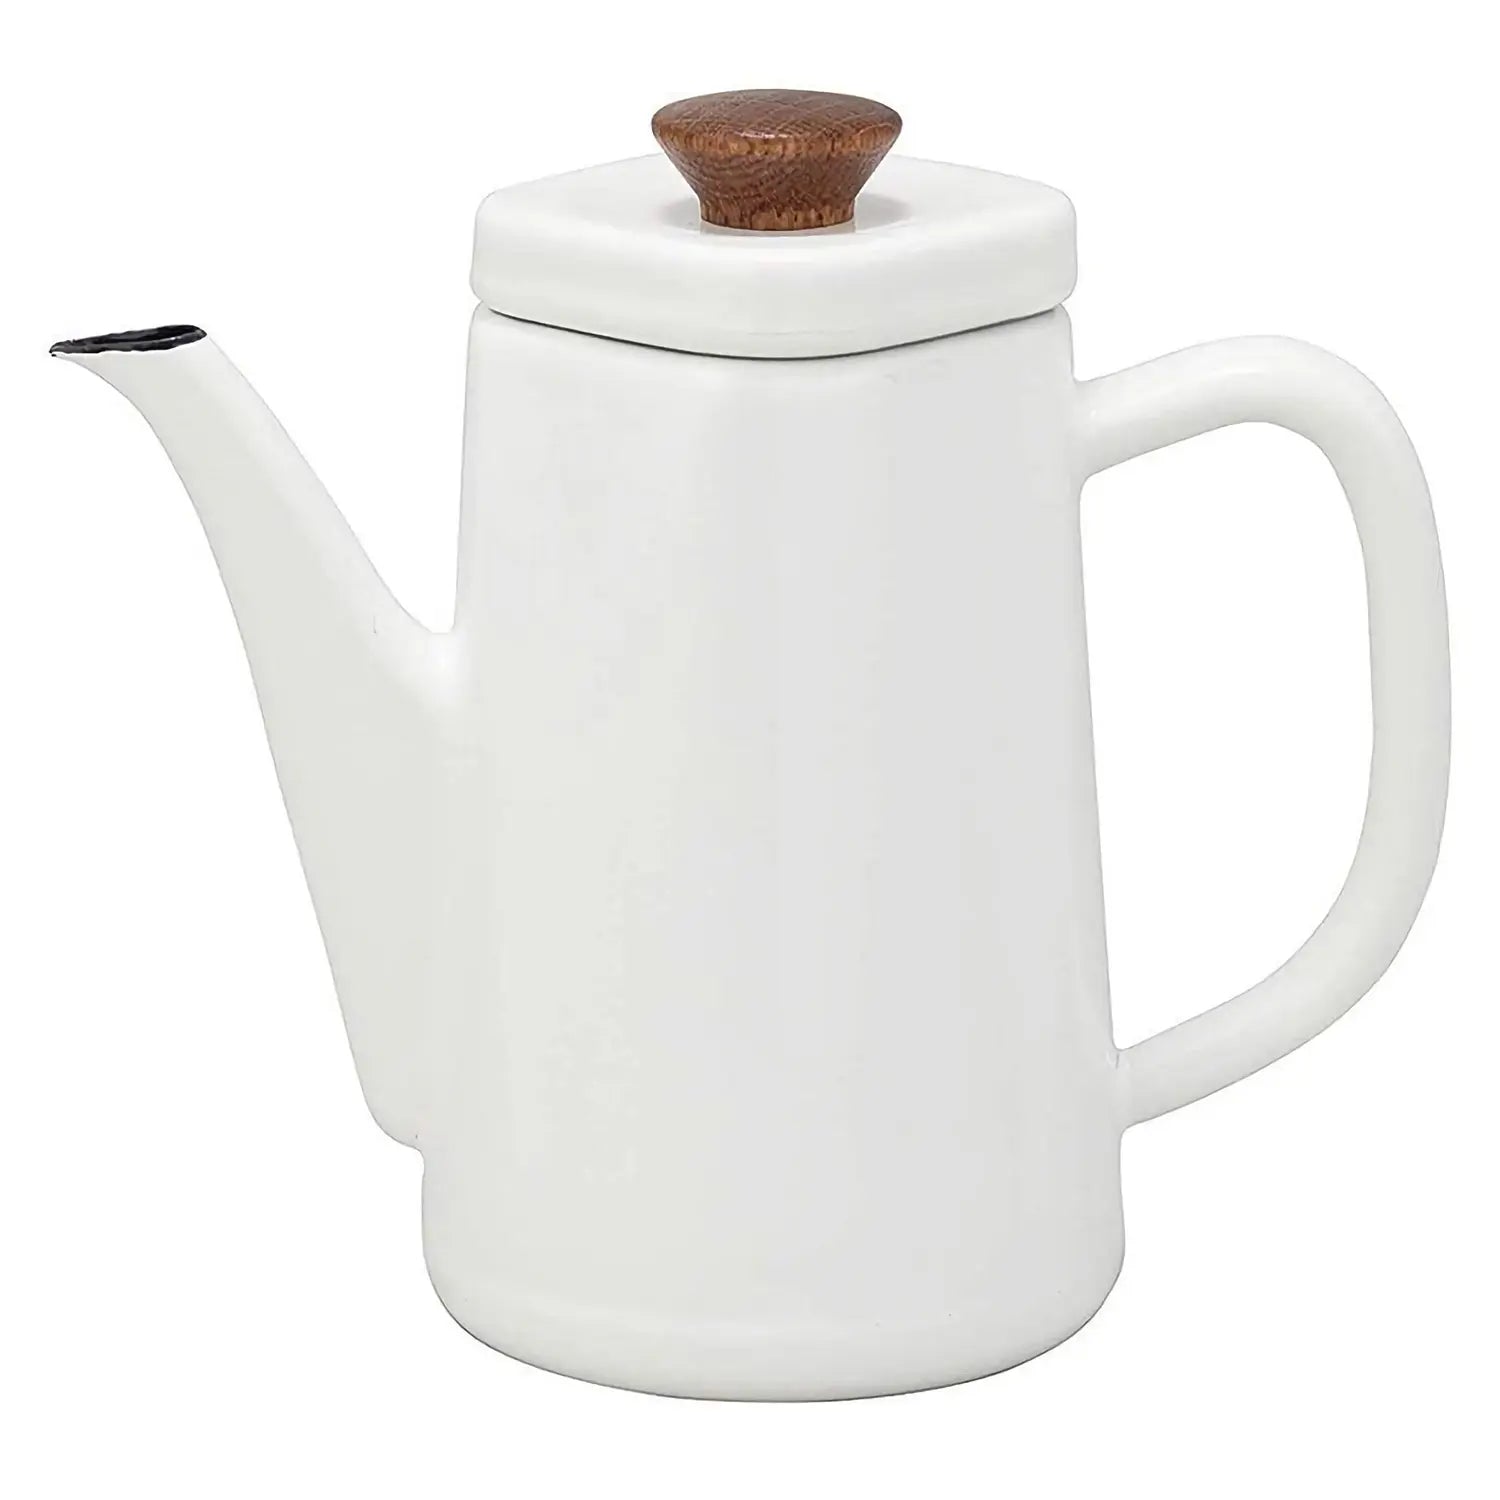 White Enamel Pourover Kettle with Wood Handle